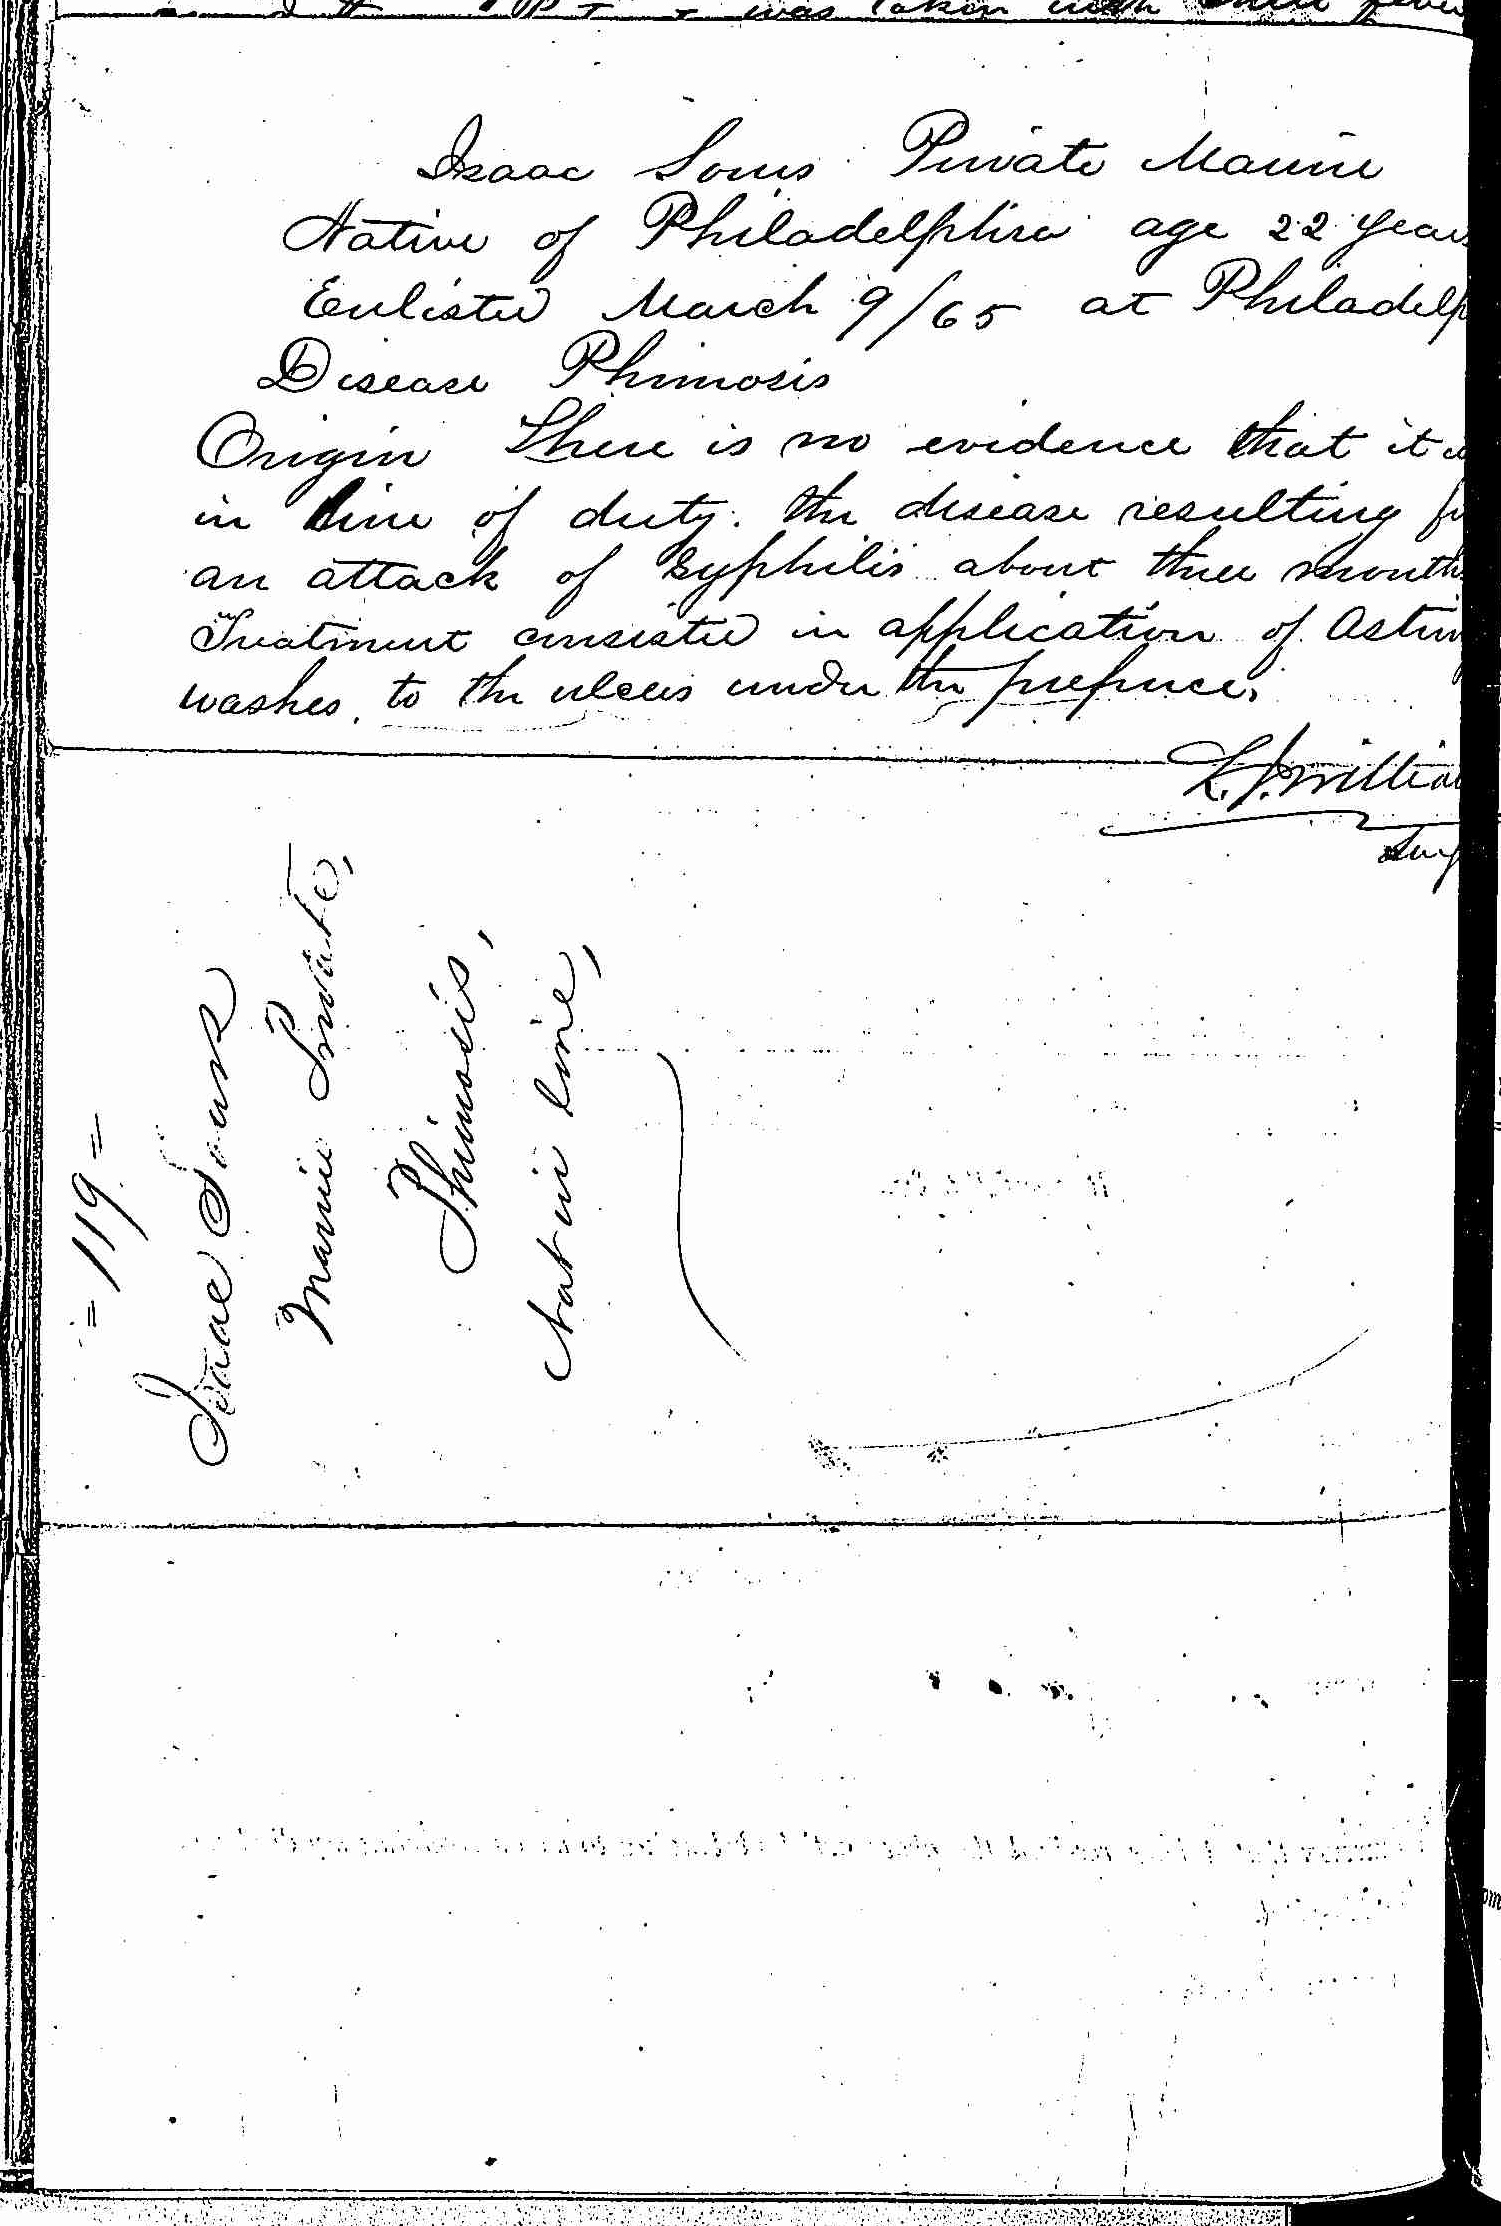 Entry for Isaac Sours (second admission page 2 of 2) in the log Hospital Tickets and Case Papers - Naval Hospital - Washington, D.C. - 1866-68